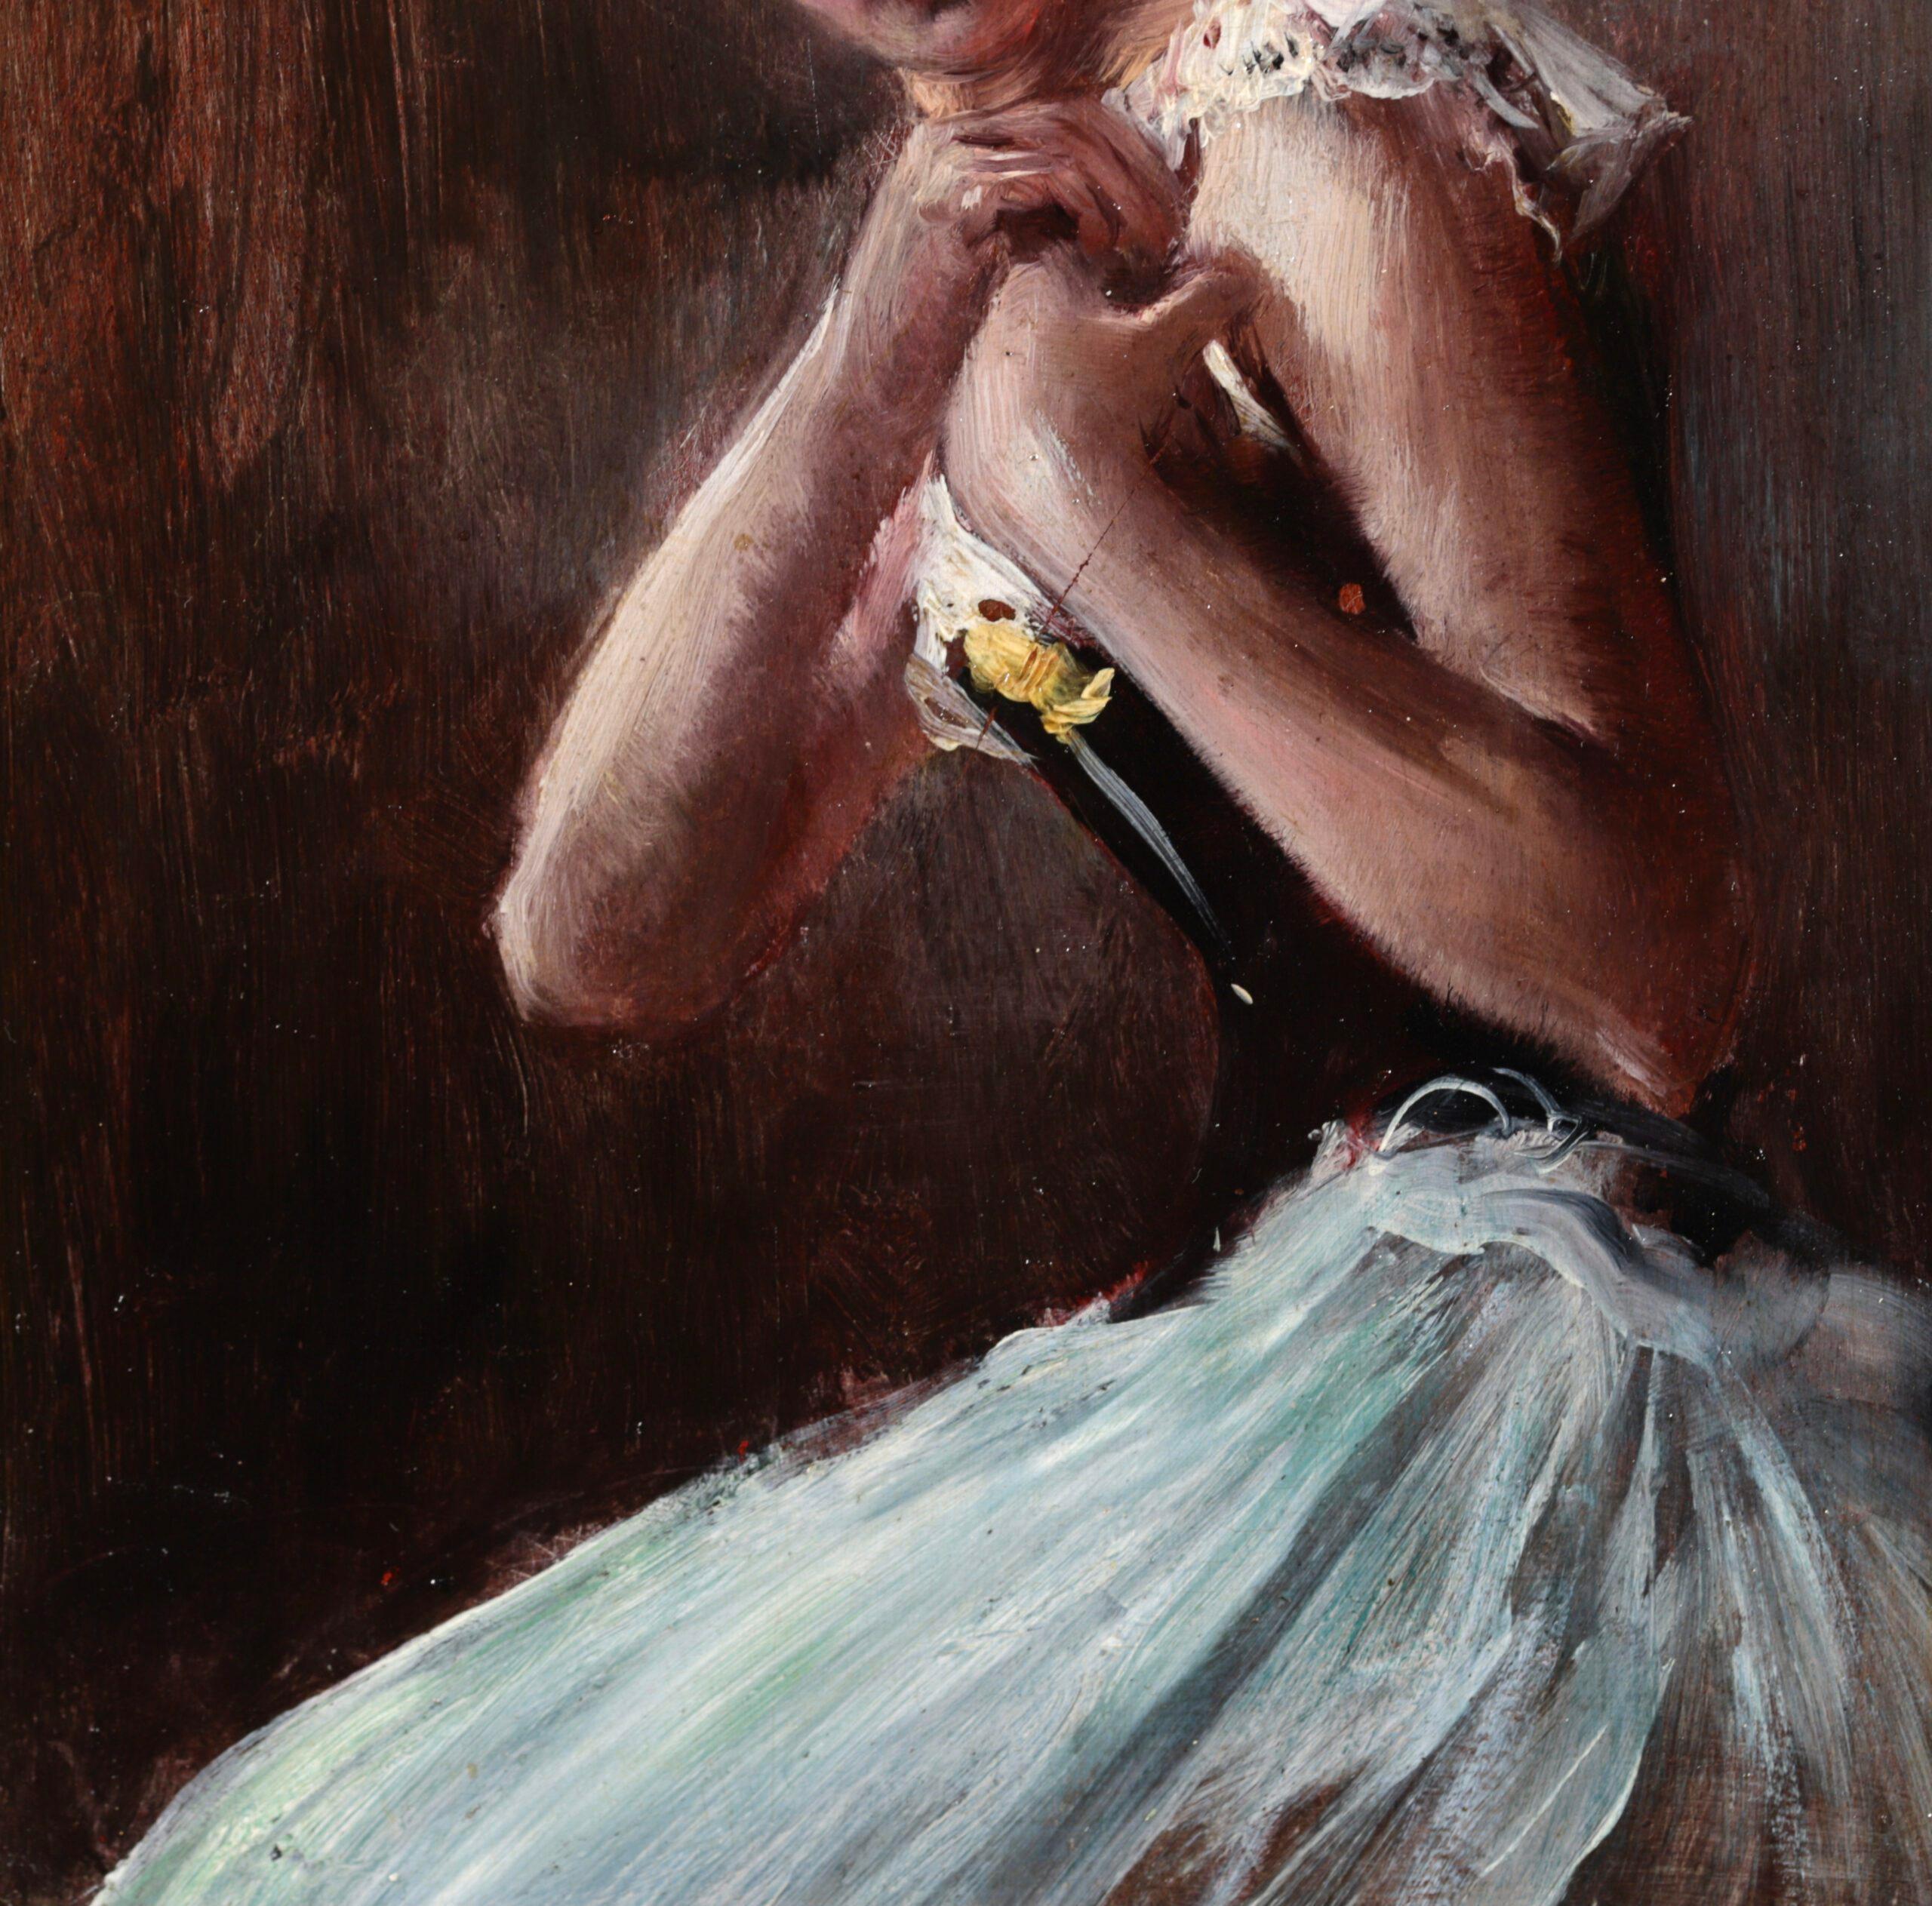 Dancer at the Opera - Impressionist Portrait Oil Painting by Norbert Goeneutte For Sale 4